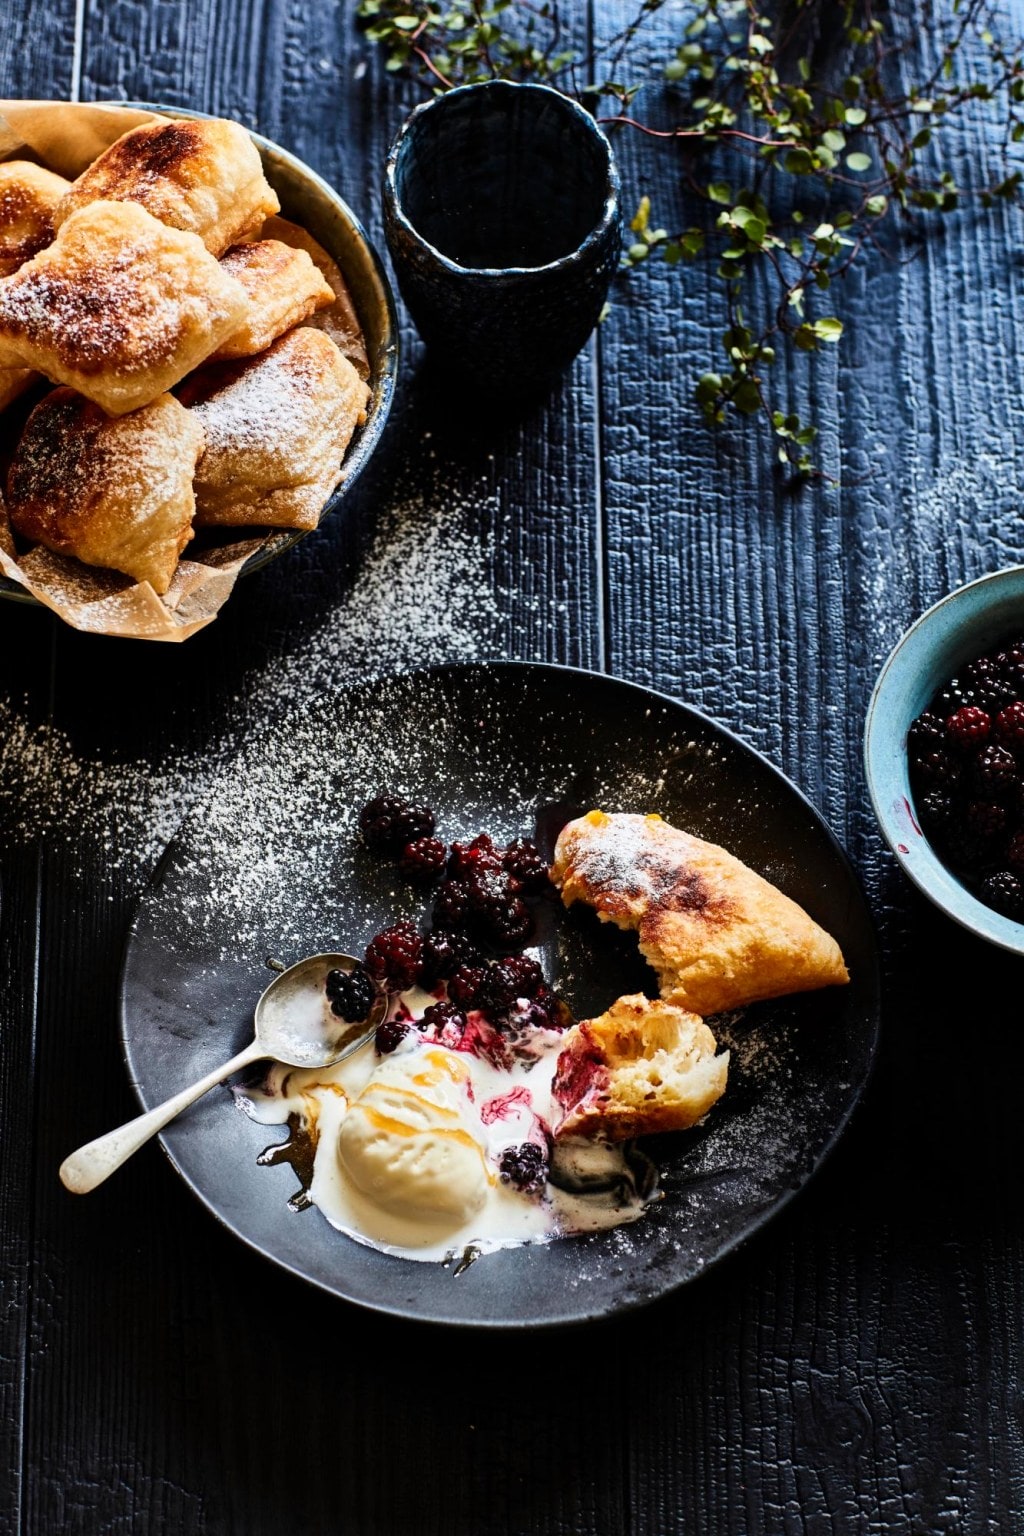 Parāoa parai fried bread with vanilla ice cream and berries on a black bowl